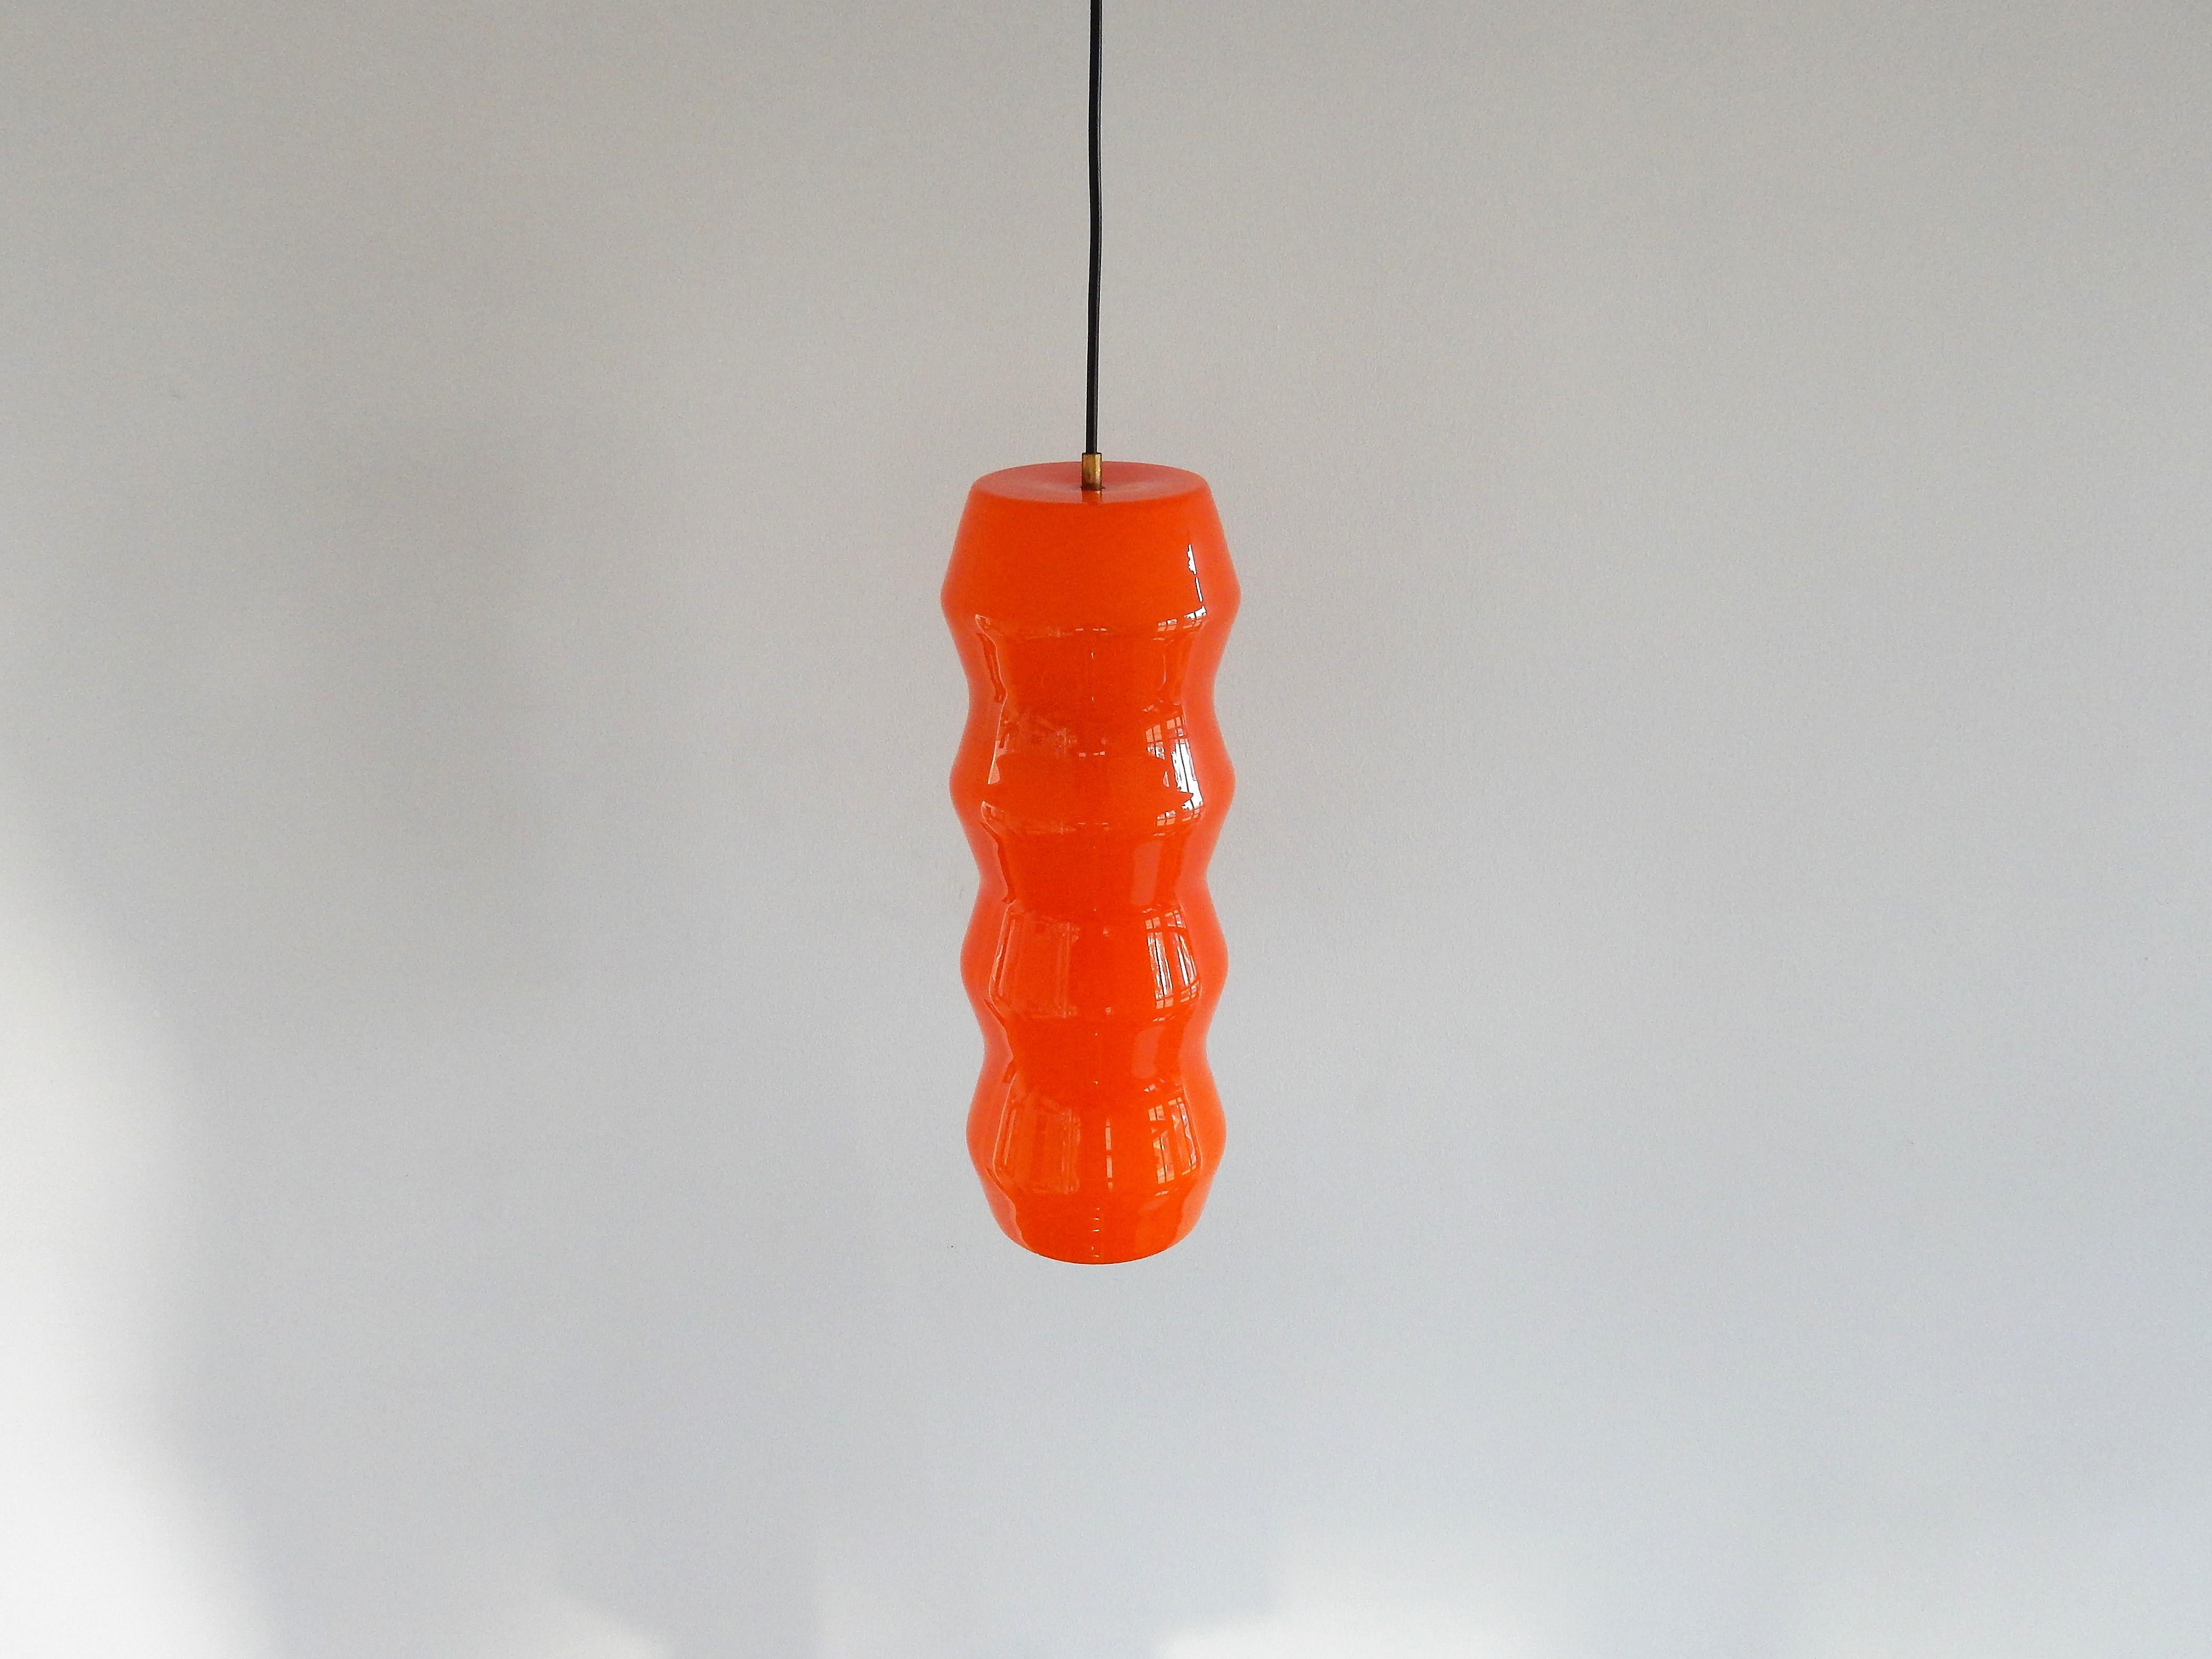 This glass pendant light is documented in a catalogue by the company of 'Indoor'. This was the importer and dealer of light brands as Vistosi, Venini and Arteluce in The Netherlands. They do not connect this light to a designer or producer in the